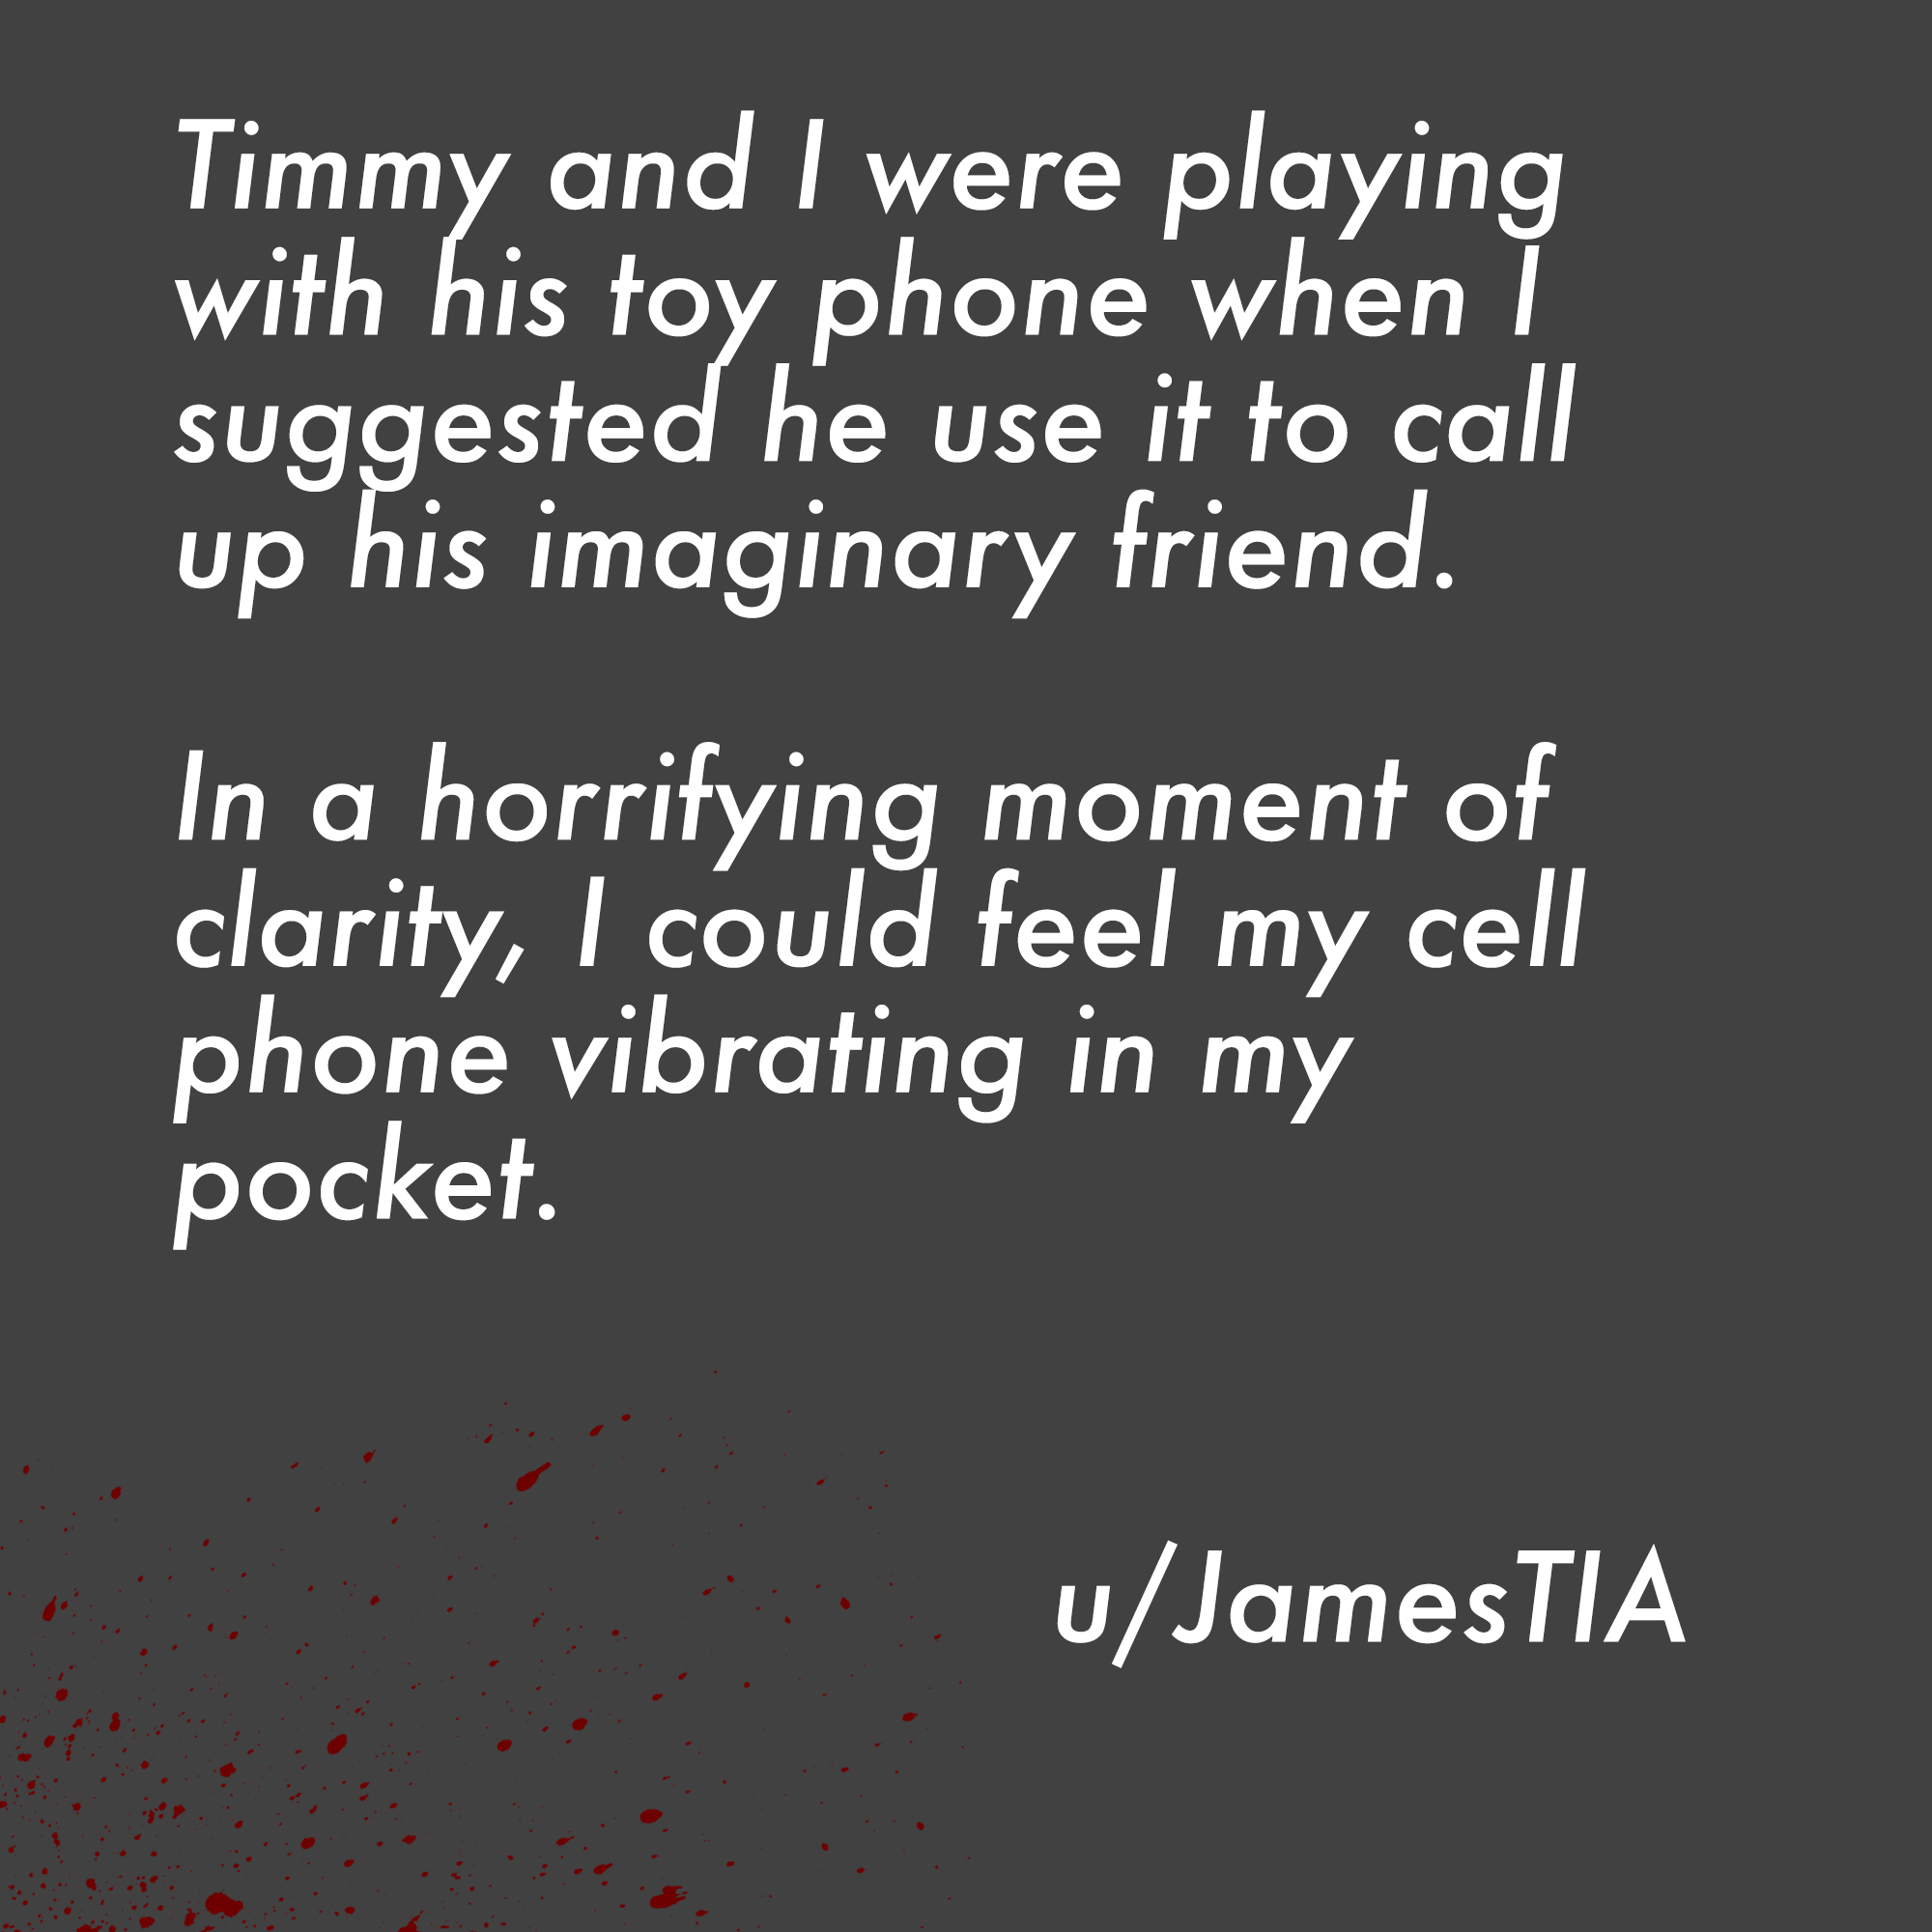 two line horror stories - 1 corinthians 13 11 - Timmy, and I were playing with his toy phone when I suggested he use it to call up his imaginary friend. In a horrifying moment of clarity, I could feel my cell phone vibrating in my pocket. uJamesTIA